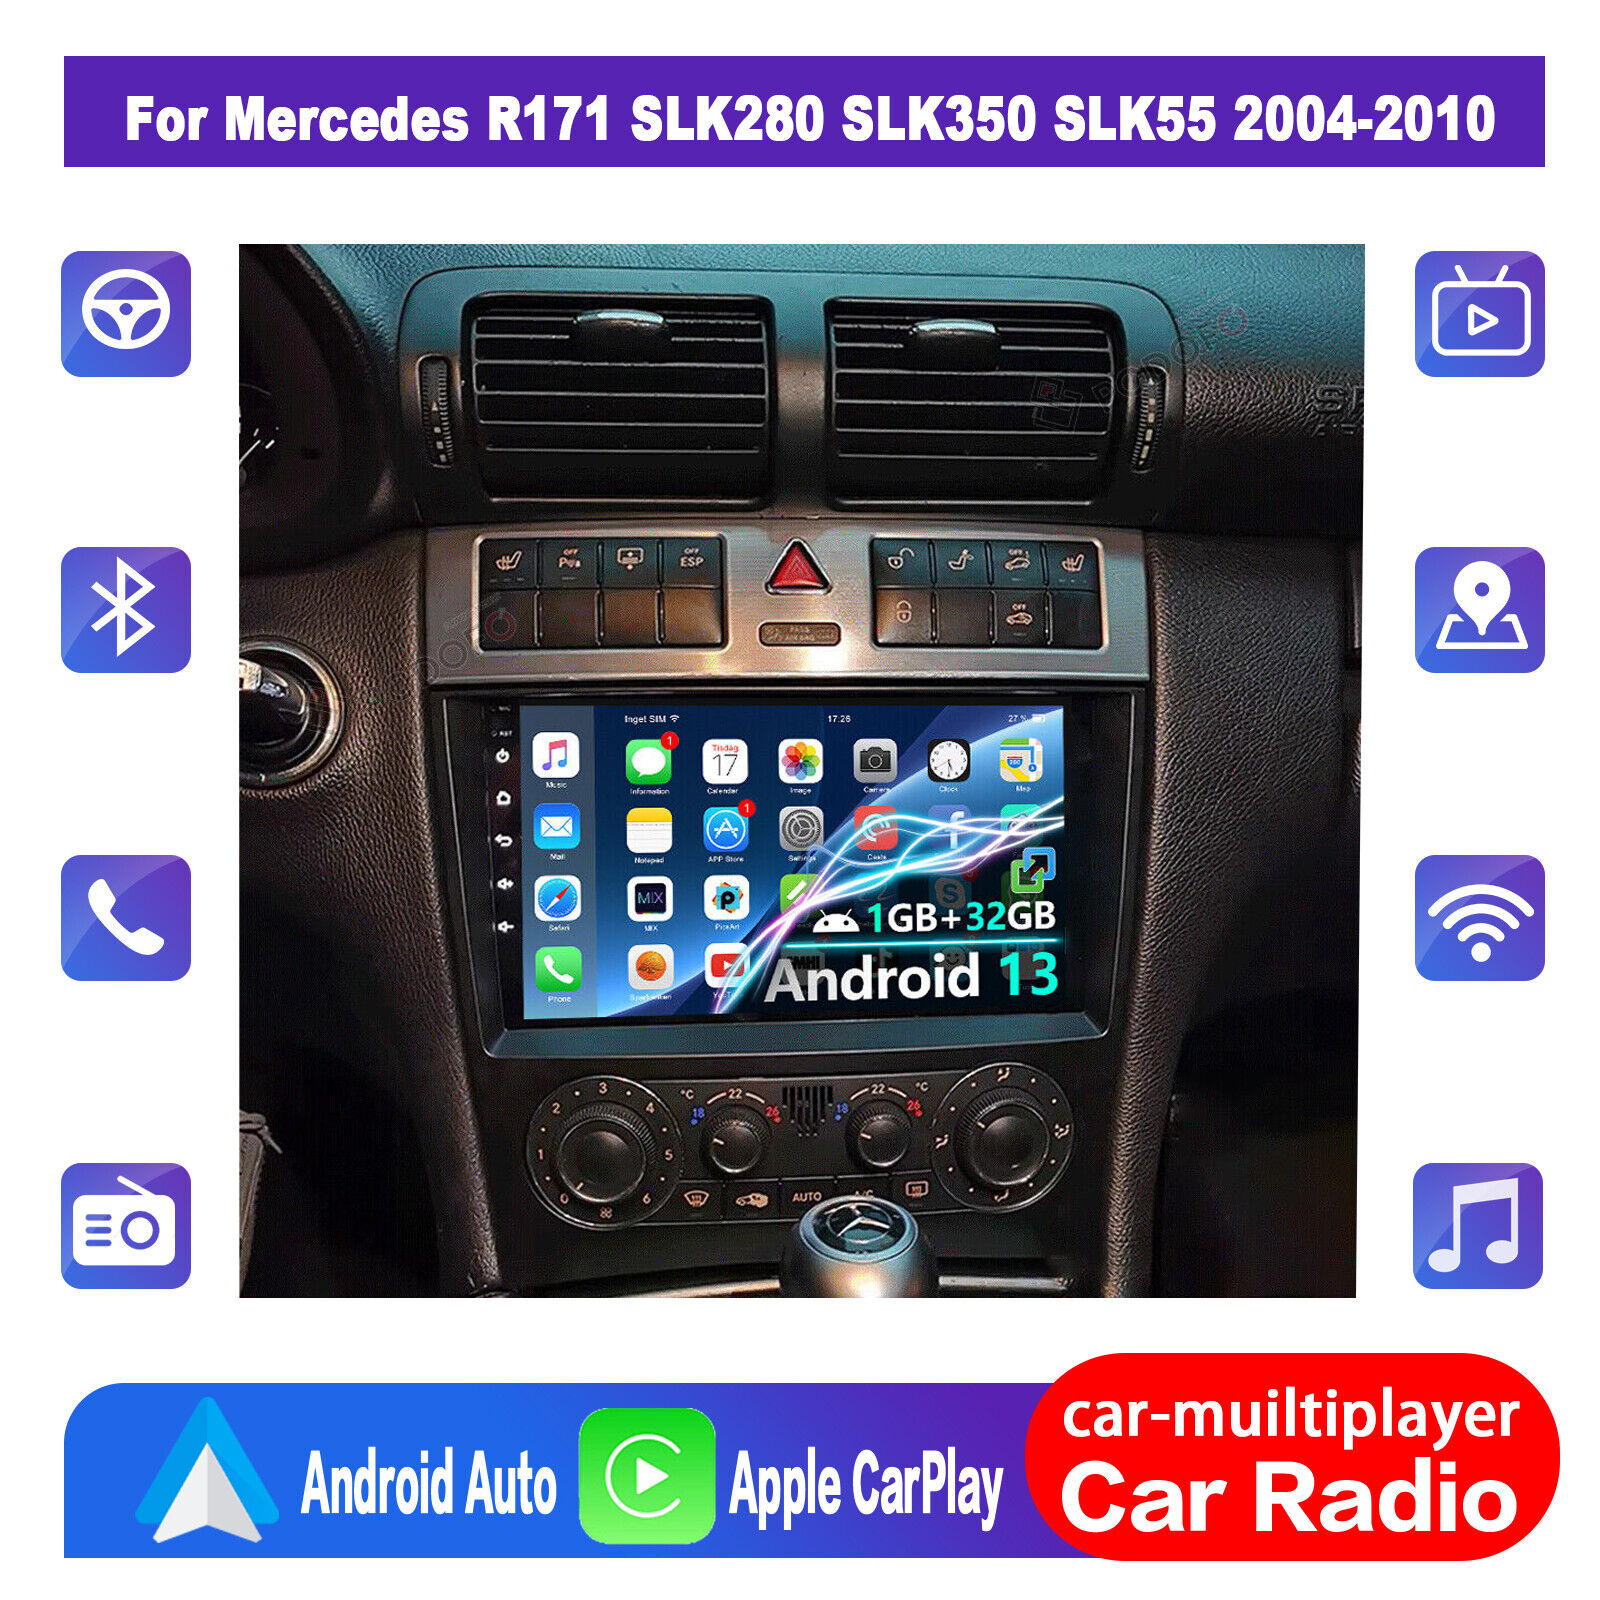 For Mercedes Benz C320 C230 C240 C32/55 AMG Car Radio GPS Navi Stereo Android 13